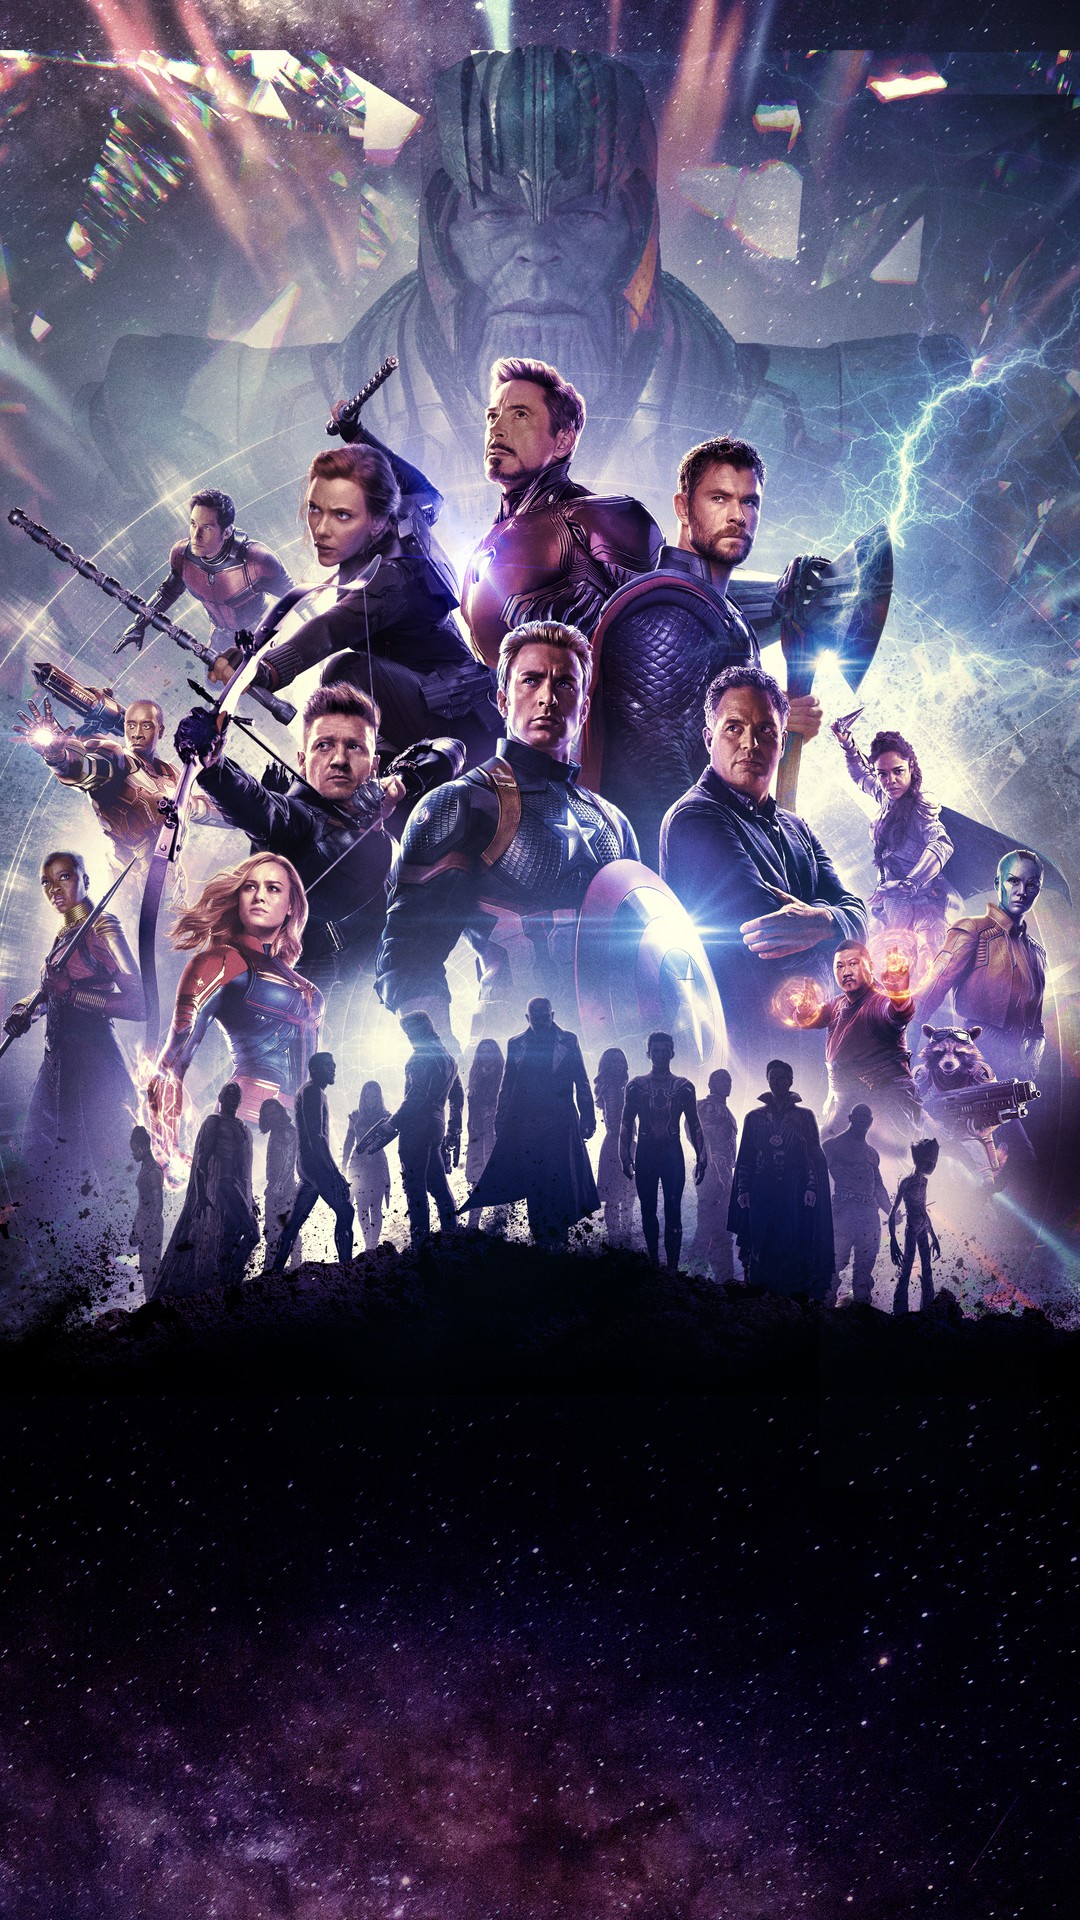 Avengers Endgame 2019 Android Wallpaper With High-resolution - Avengers Endgame Wallpaper Android - HD Wallpaper 